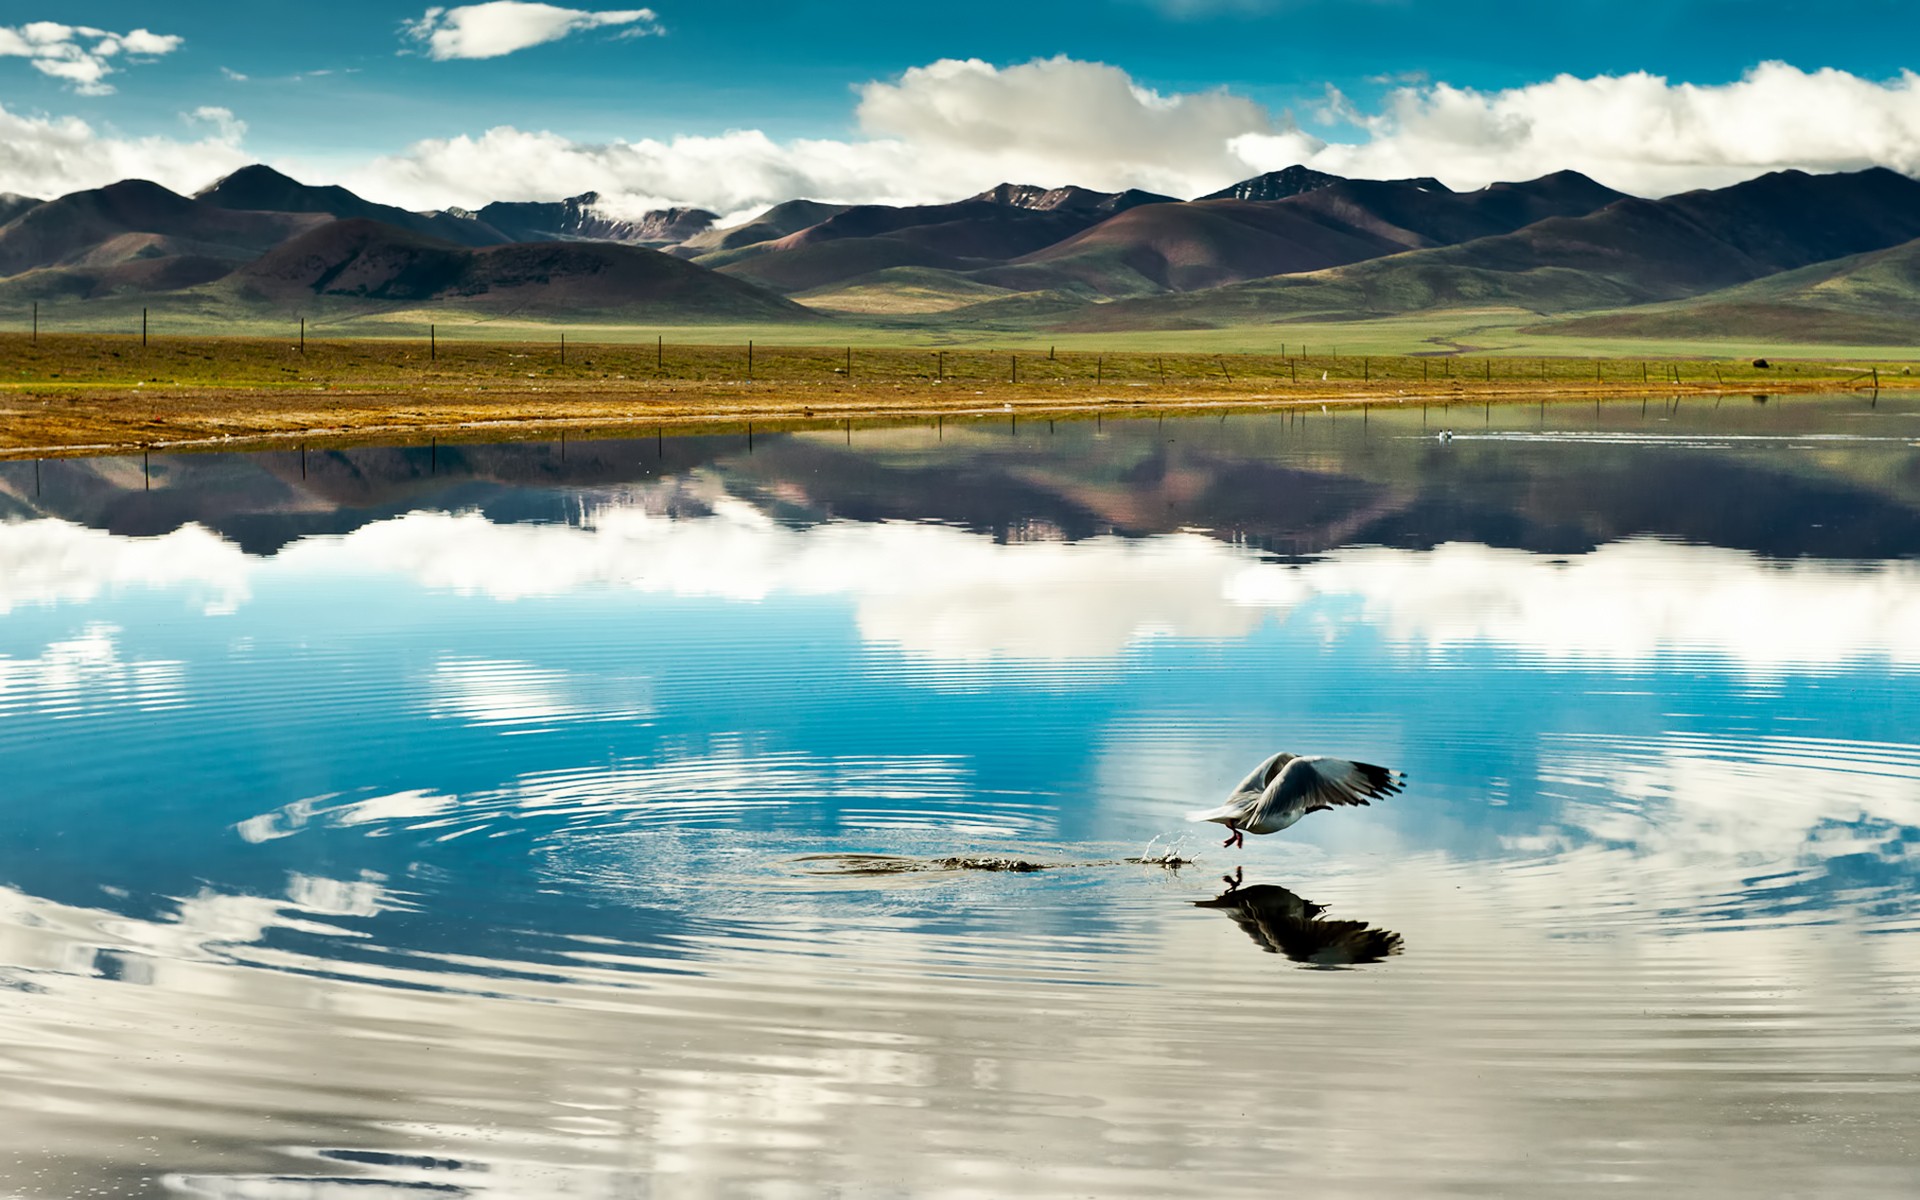 Tibet Live Wallpaper APK for Android Download